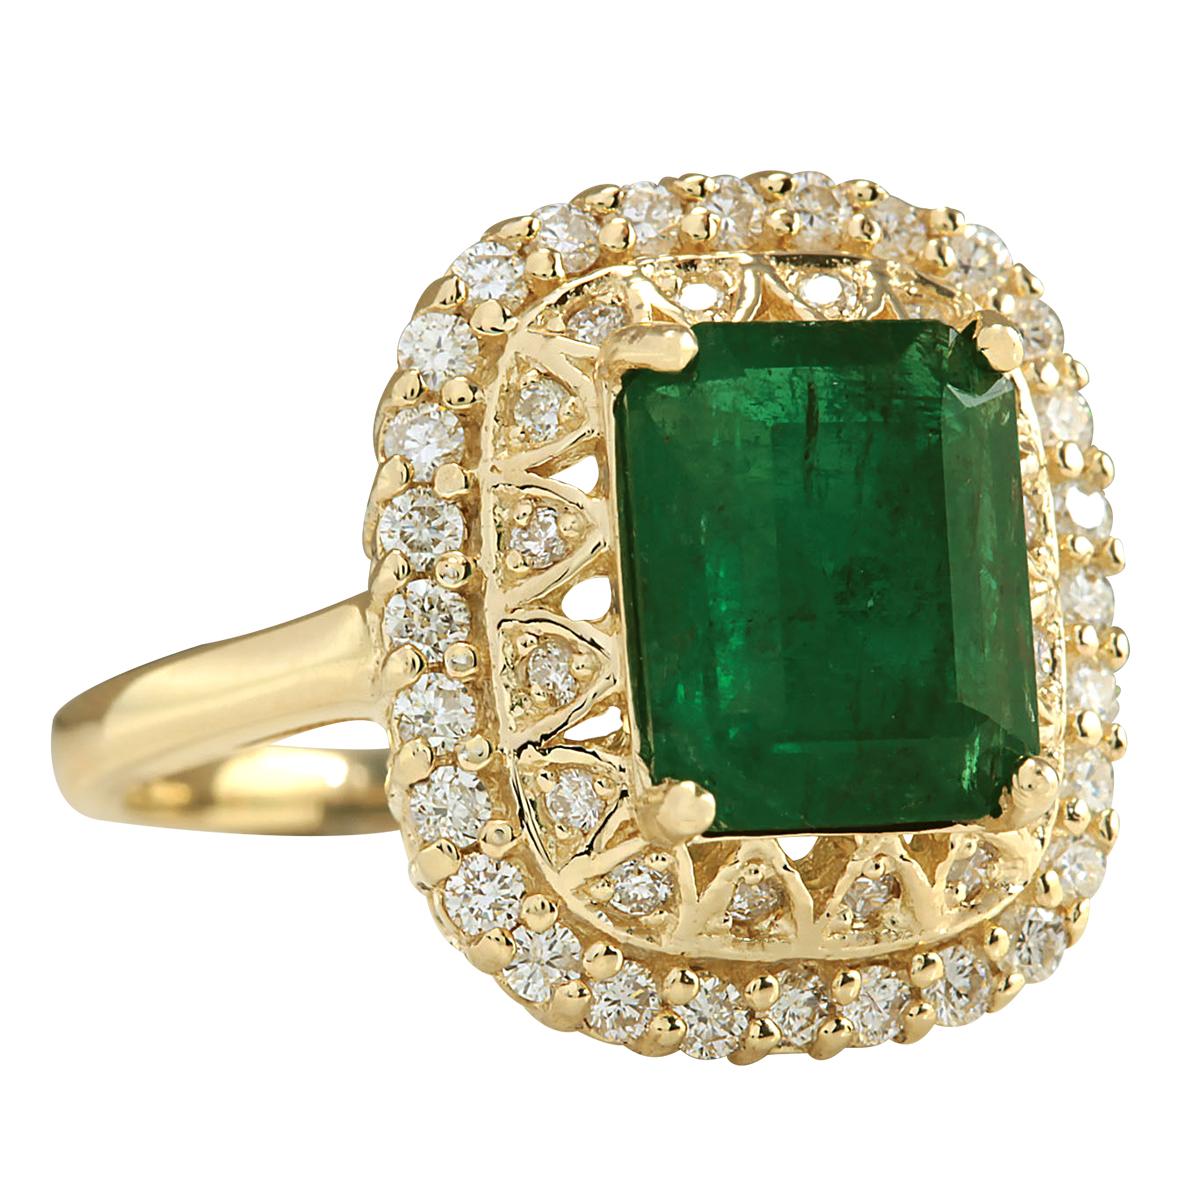 Stamped: 14K Yellow Gold
Total Ring Weight: 6.2 Grams
Total Natural Emerald Weight is 2.51 Carat (Measures: 10.00x8.00 mm)
Color: Green
Total Natural Diamond Weight is 0.60 Carat
Color: F-G, Clarity: VS2-SI1
Face Measures: 17.35x15.20 mm
Sku: